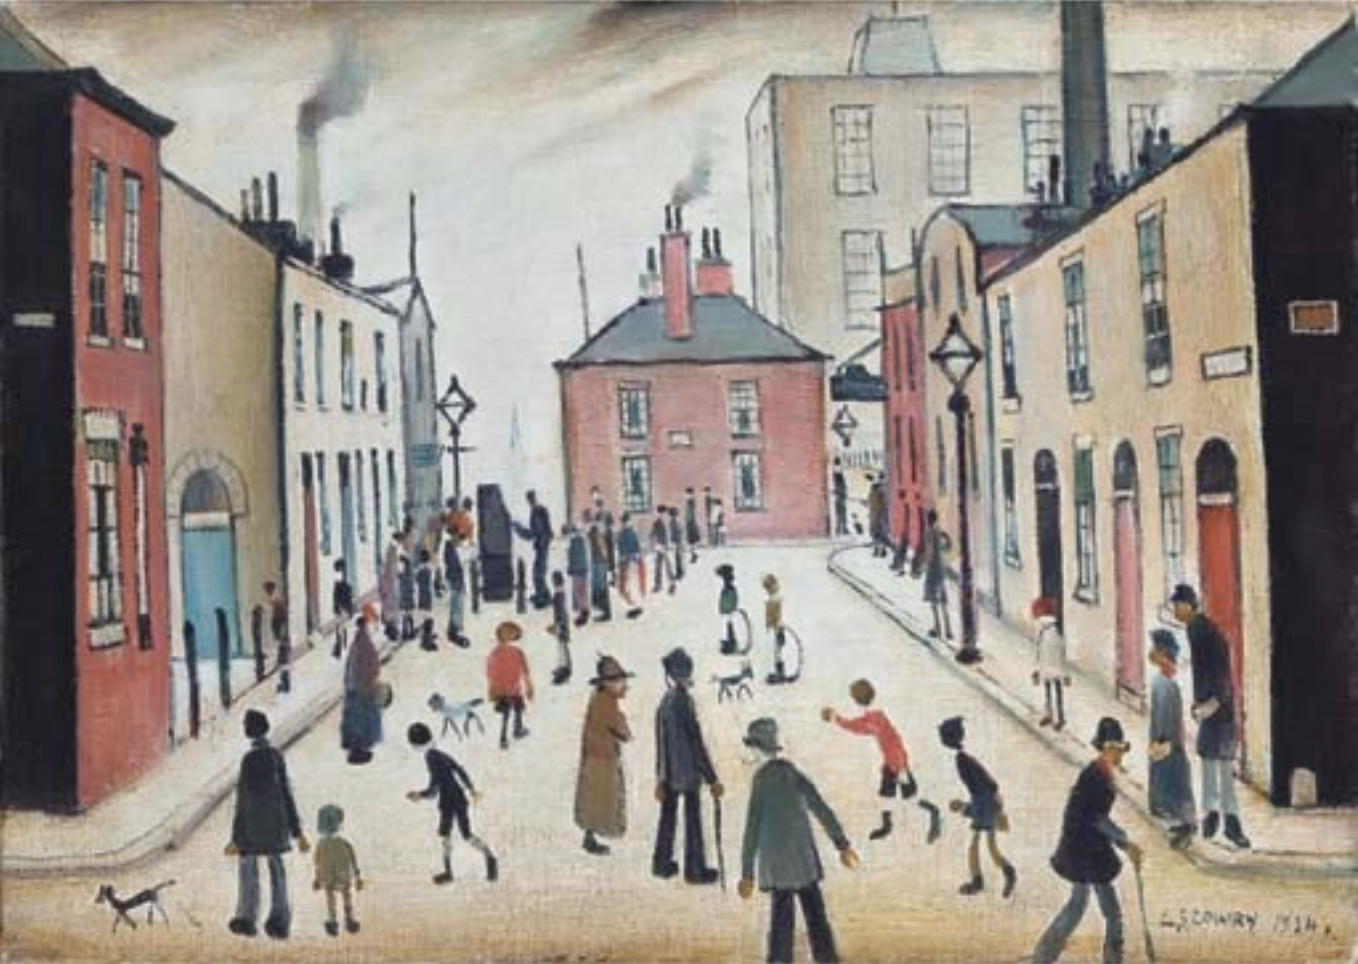 The Organ Grinder (1934) by Laurence Stephen Lowry (1887 - 1976), English artist.